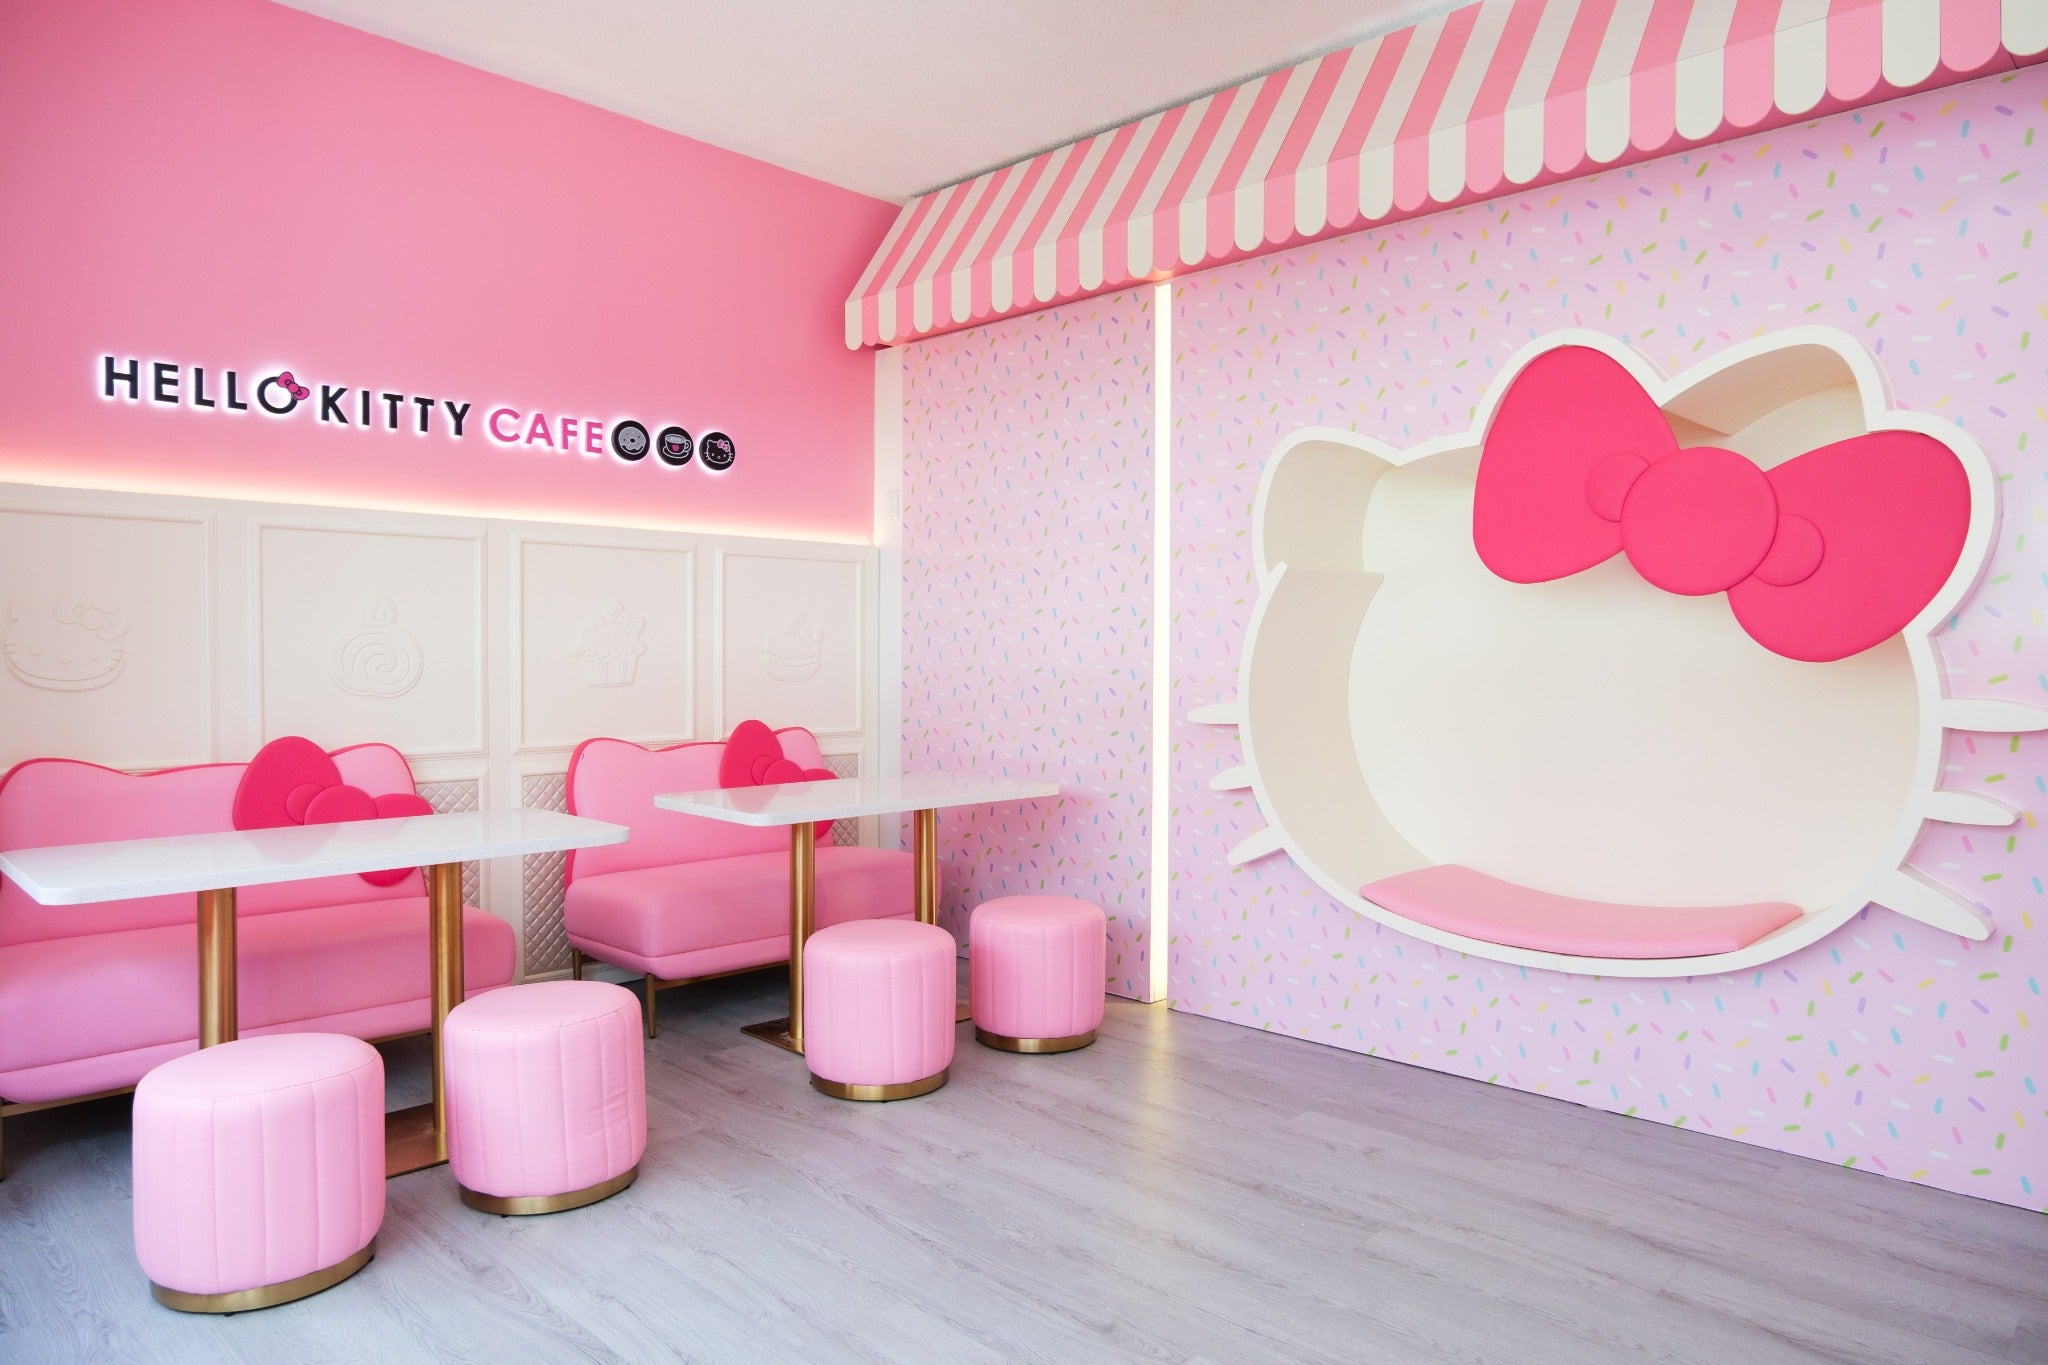 Hello Kitty Cafe Vancouver